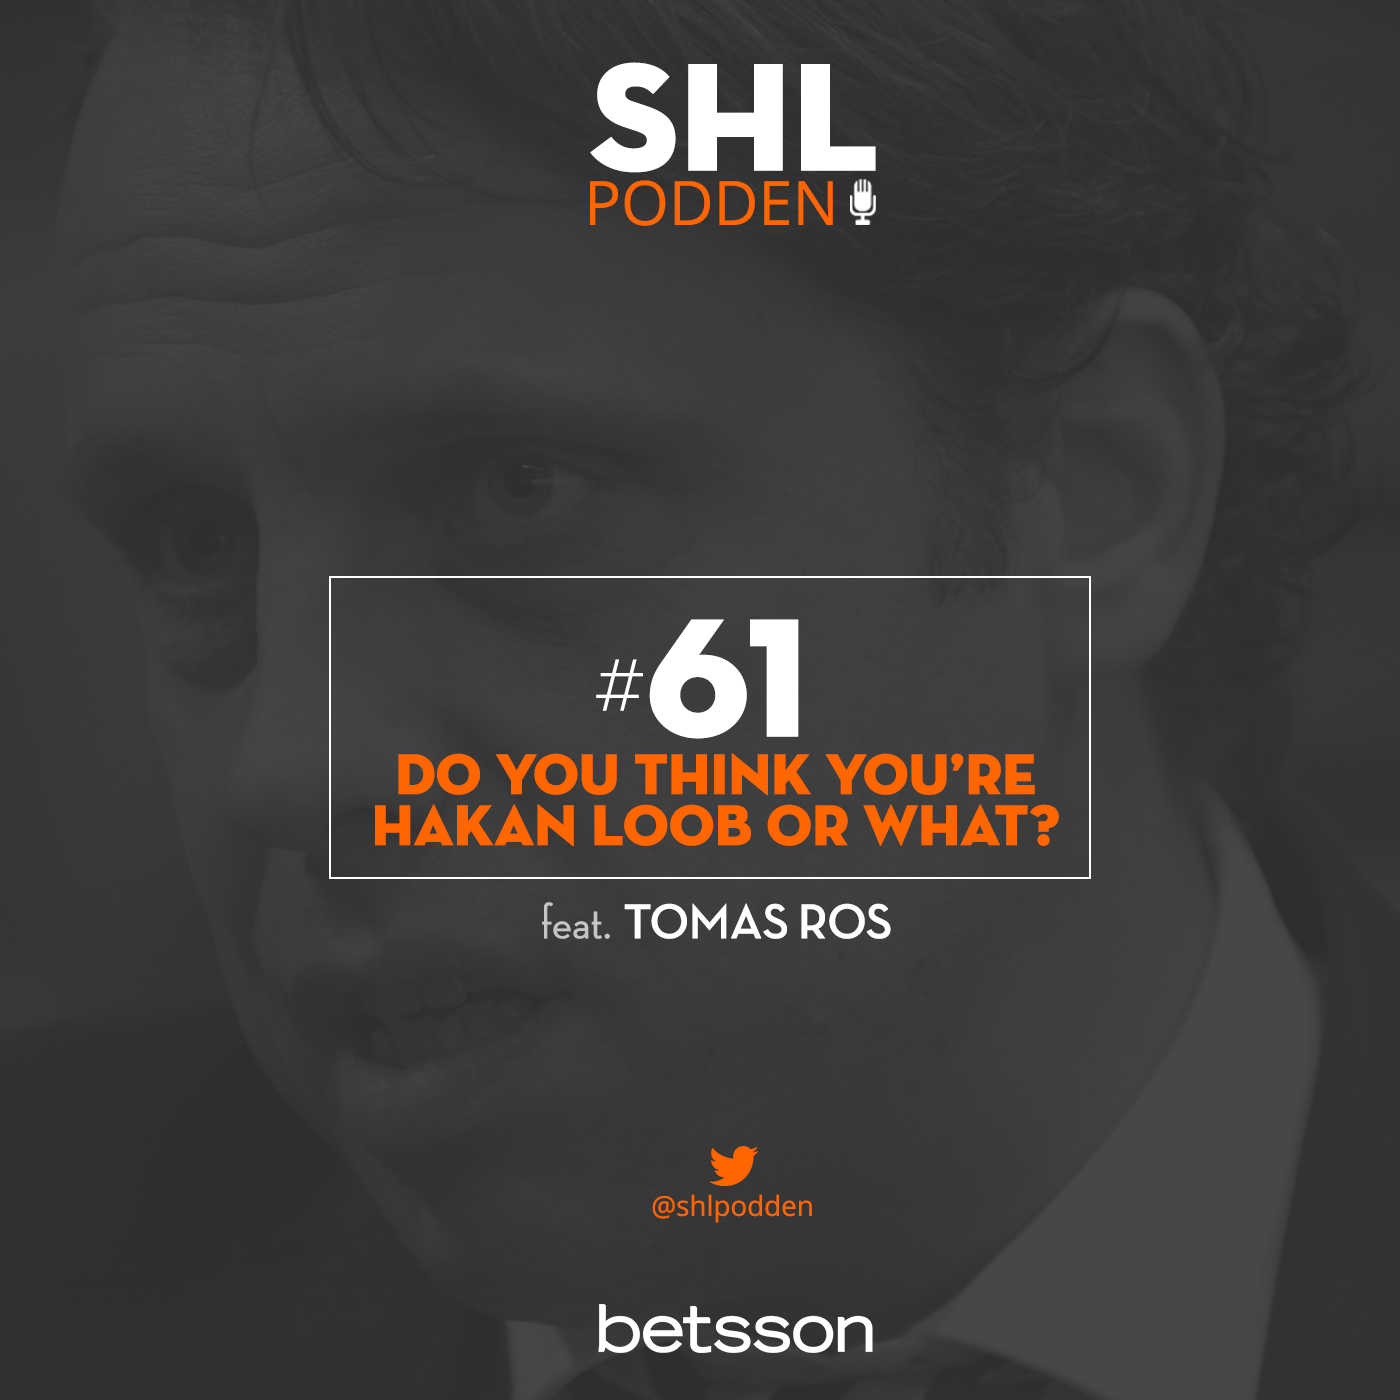 SHL-PODDEN #61 – Do you think you’re Hakan Loob or what?